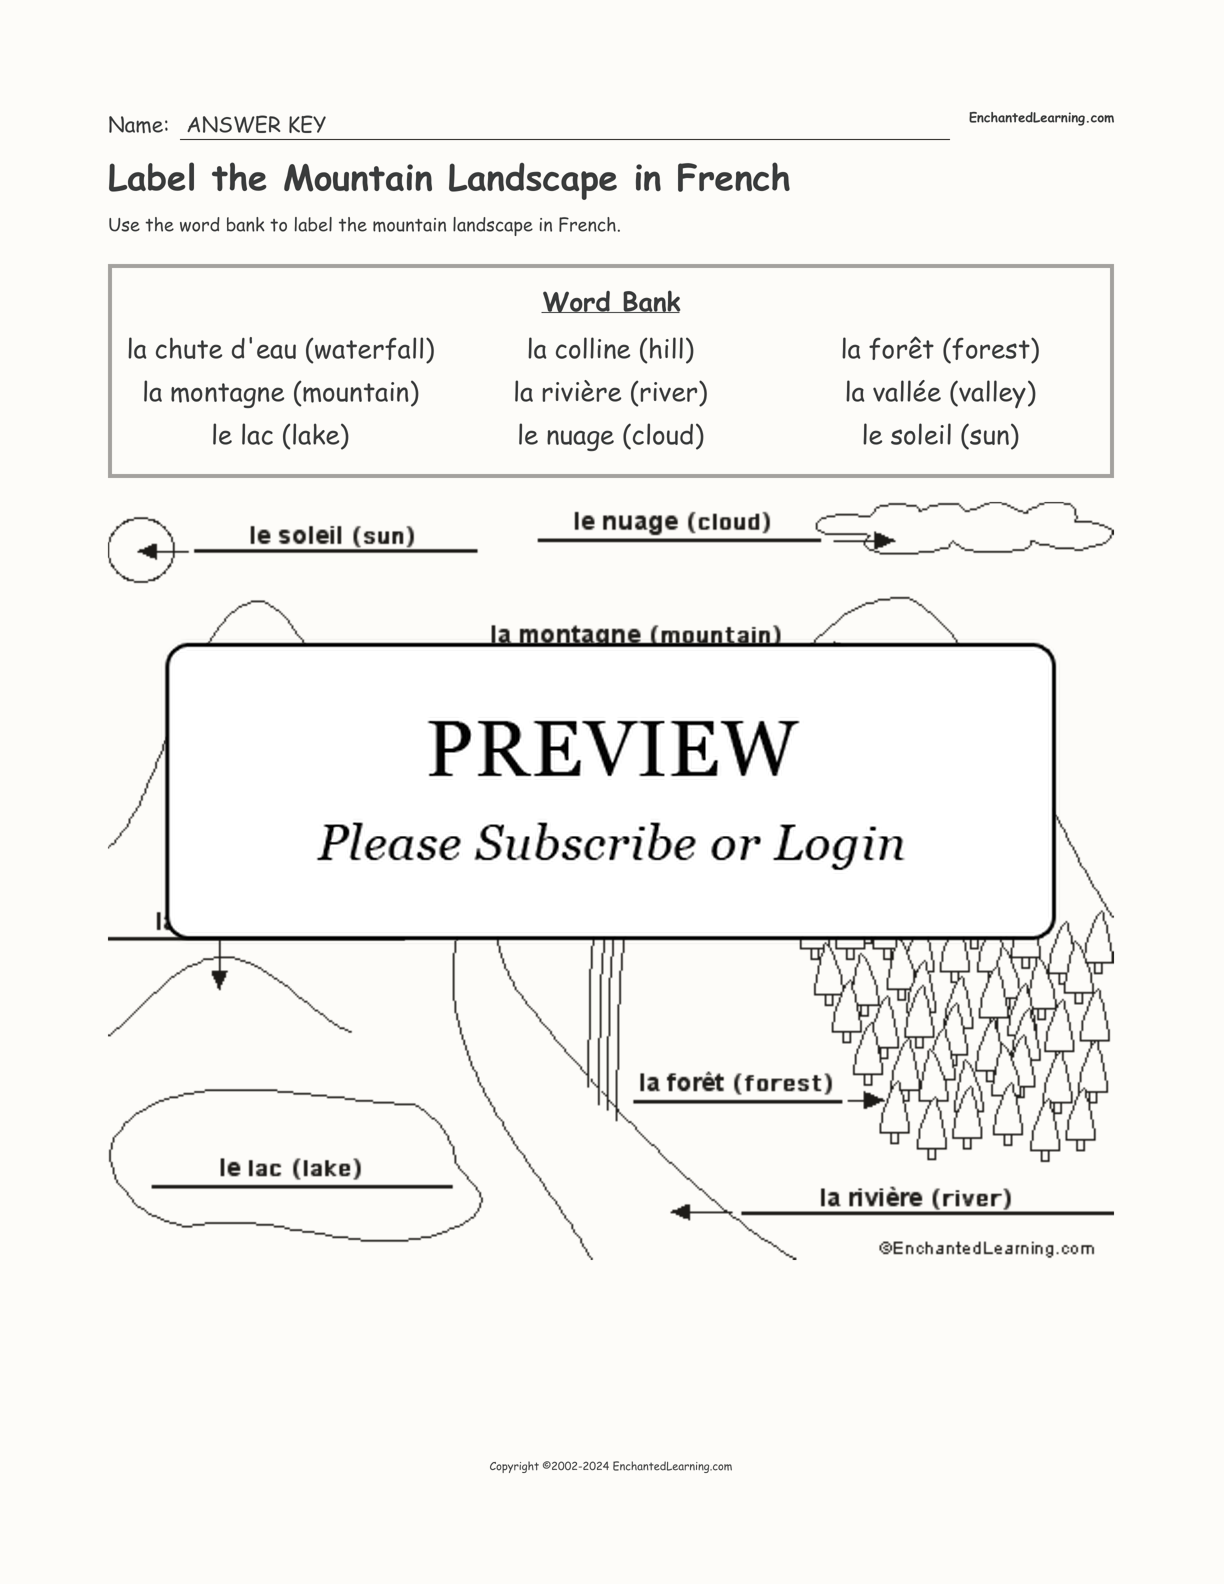 Label the Mountain Landscape in French interactive worksheet page 2